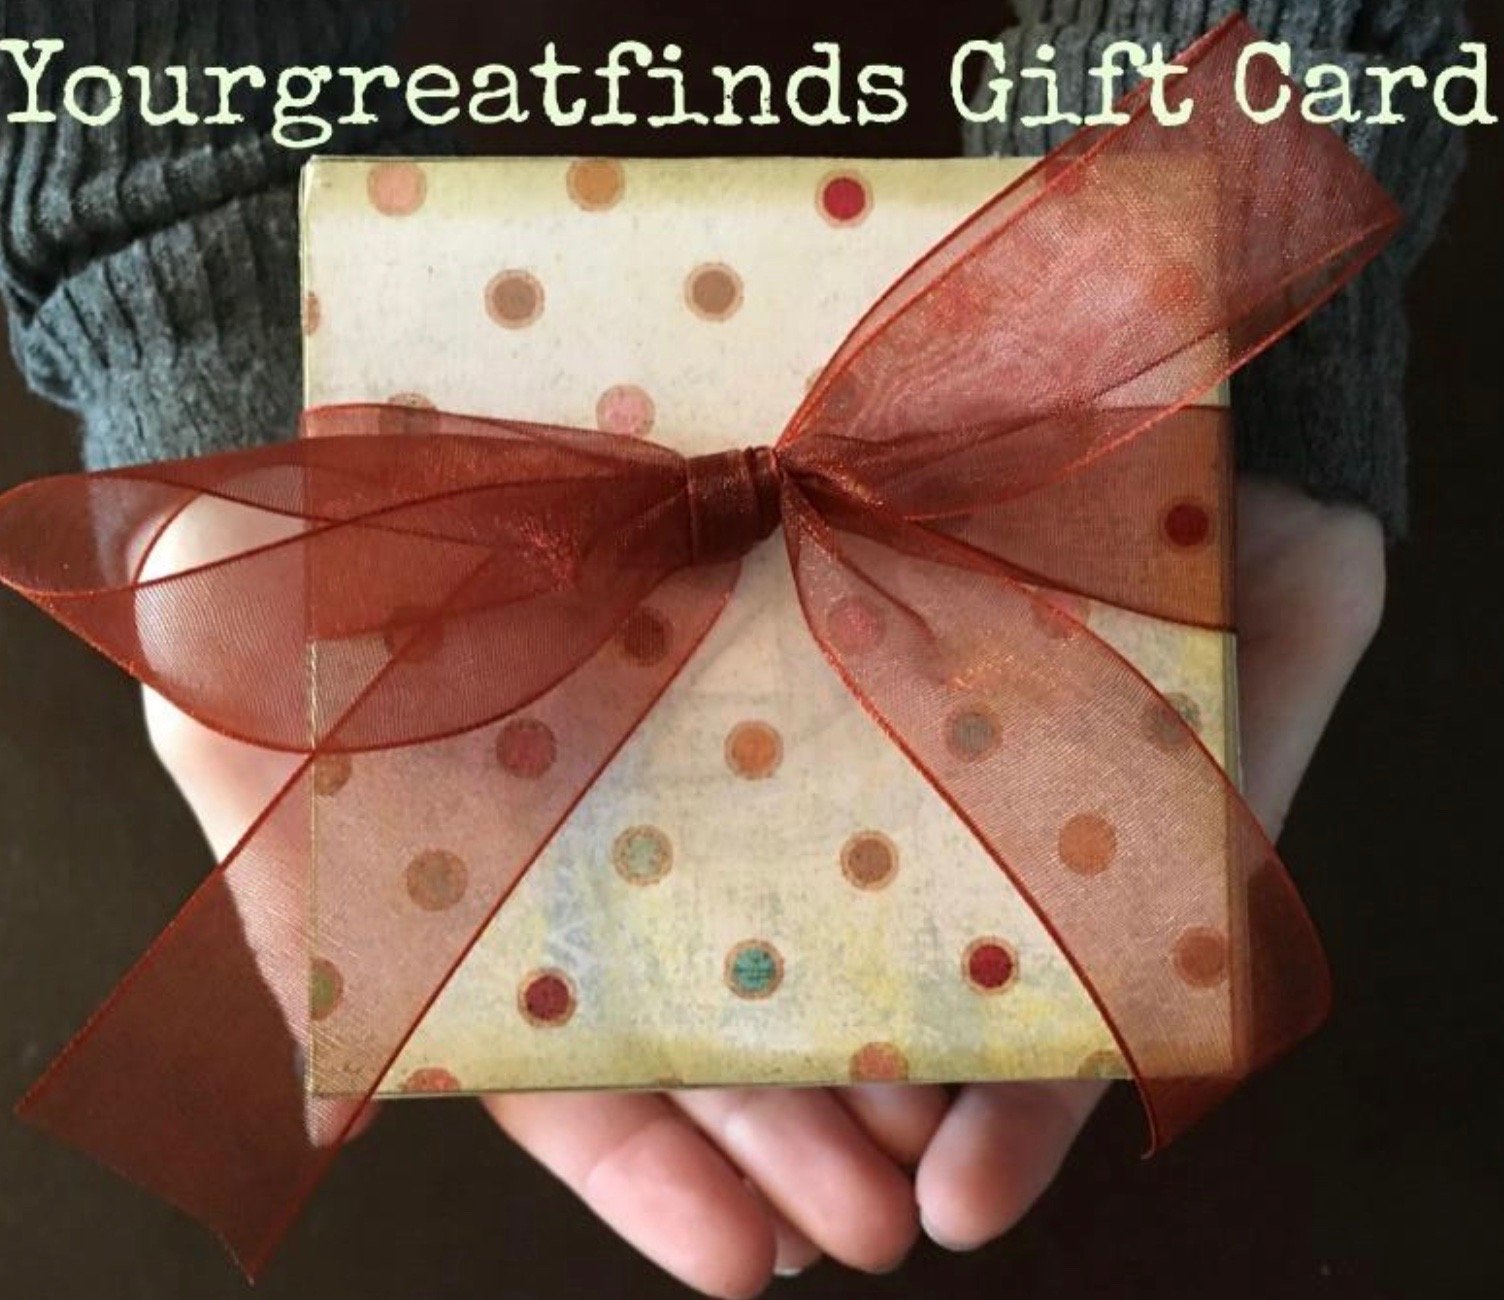 Gift Cards Yourgreatfinds